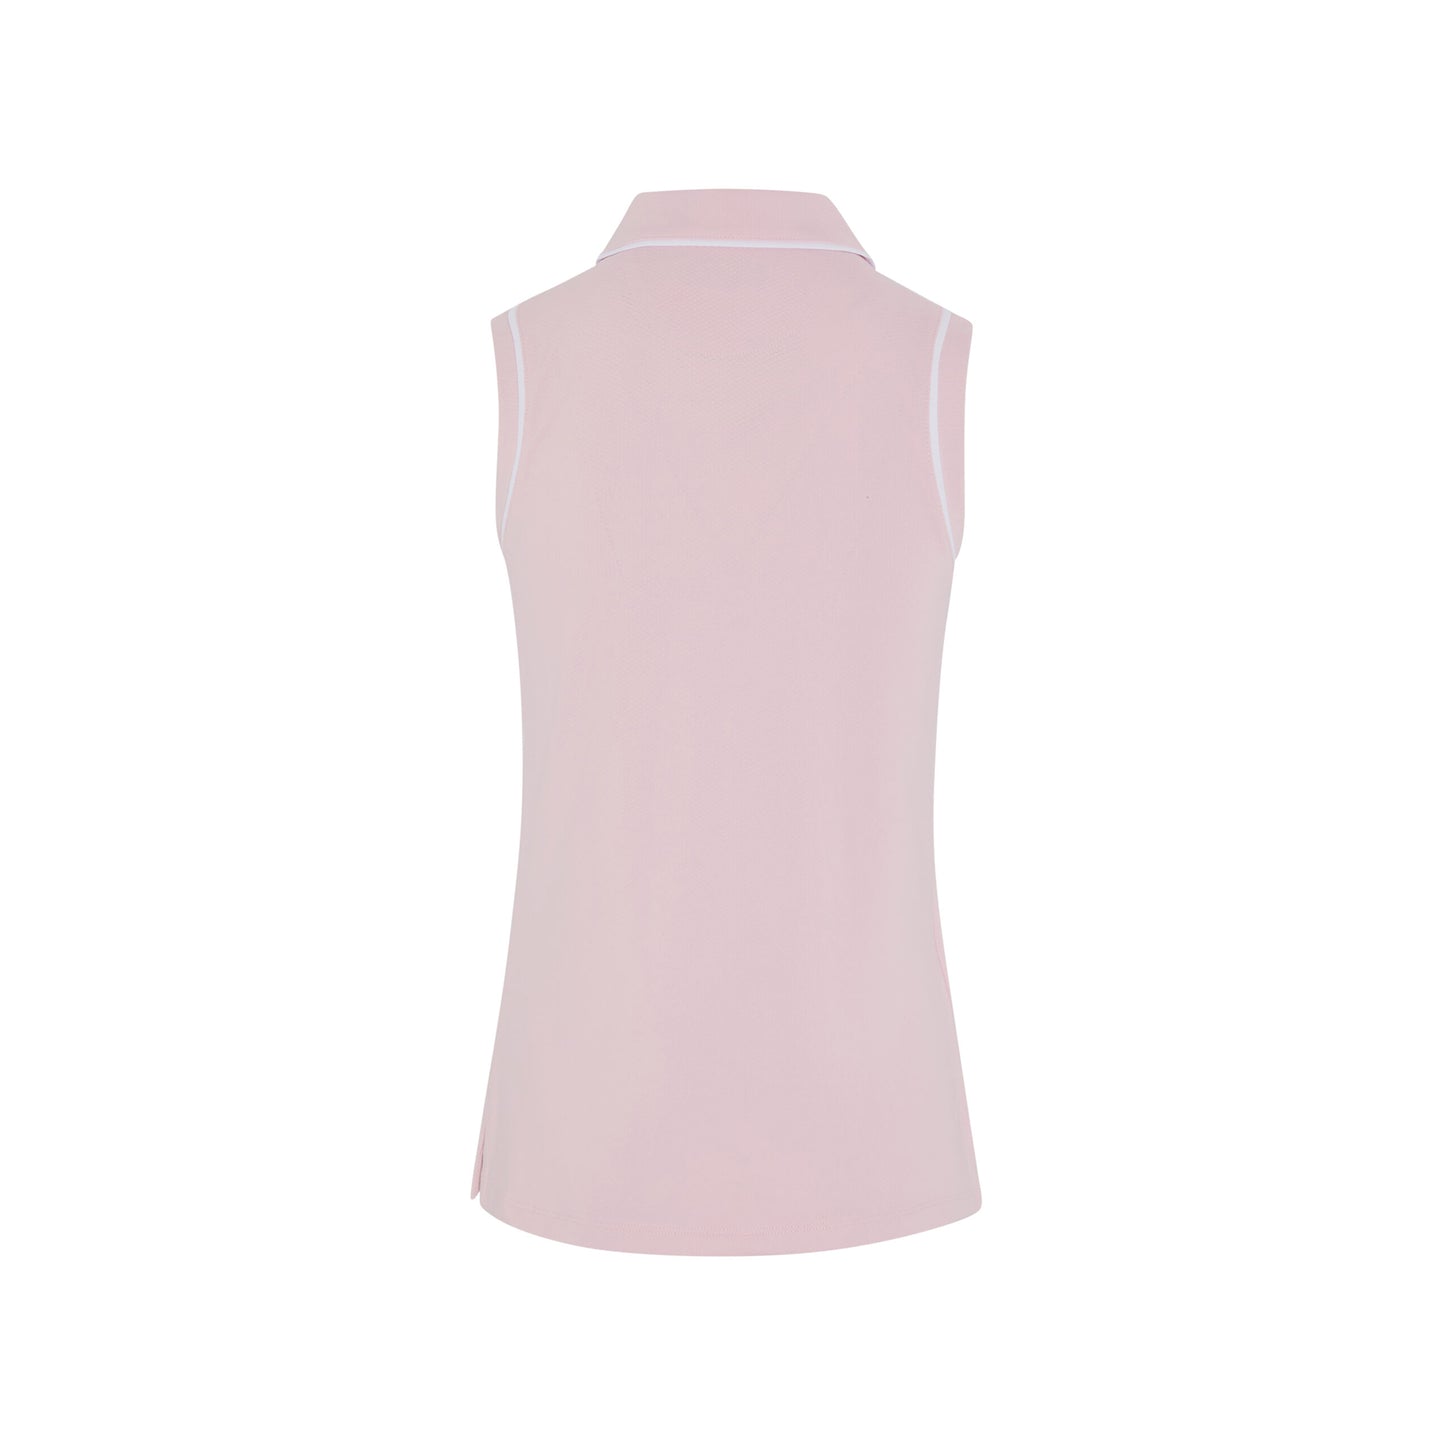 Original Penguin Womens Sleeveless Polo in Gelato Pink with Contrast Piping